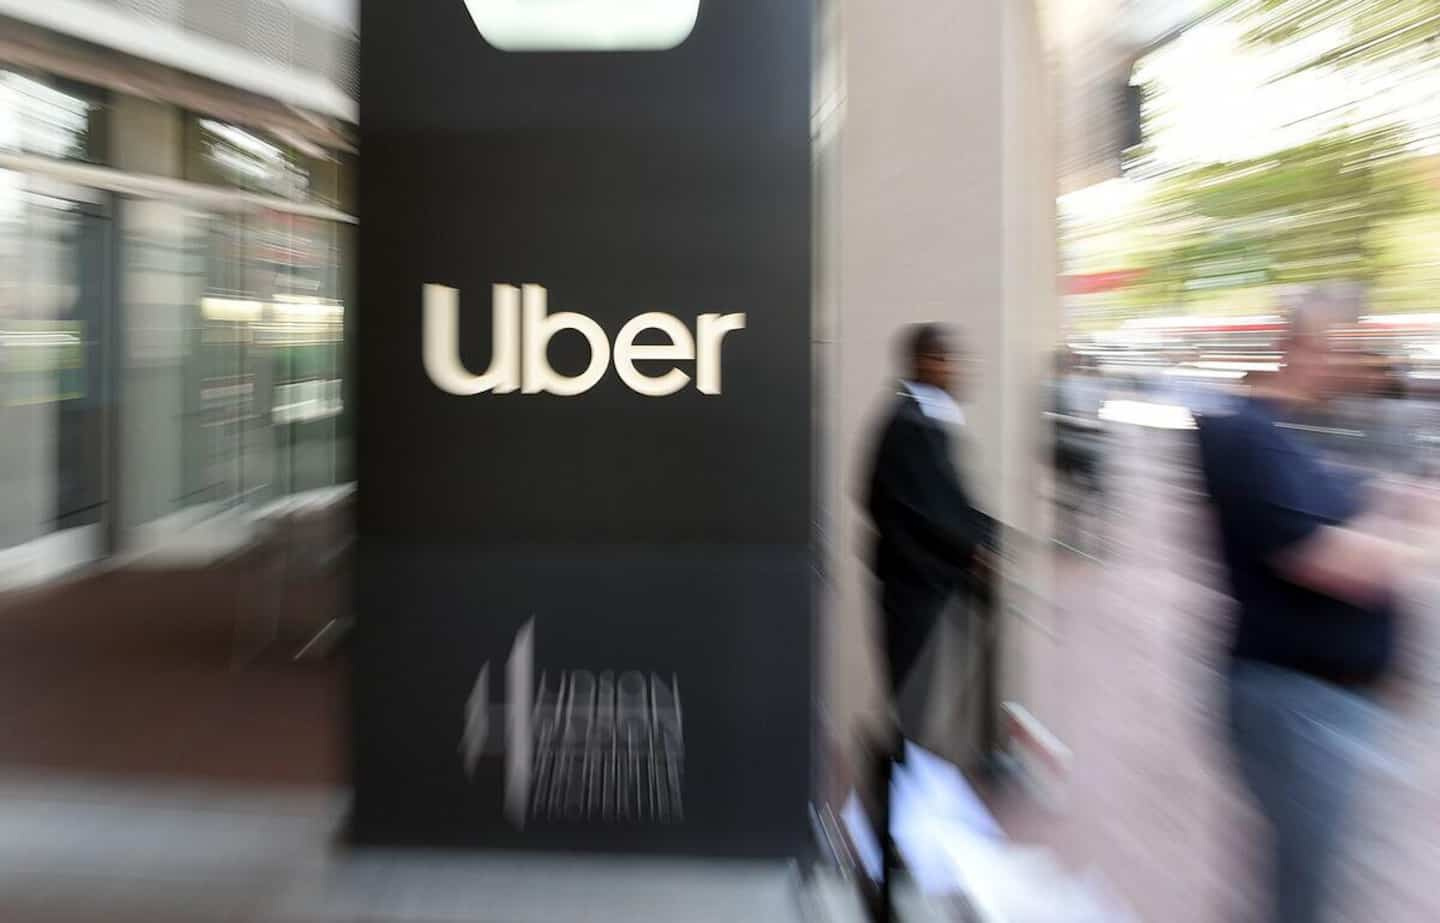 Uber: a history studded with repeated scandals